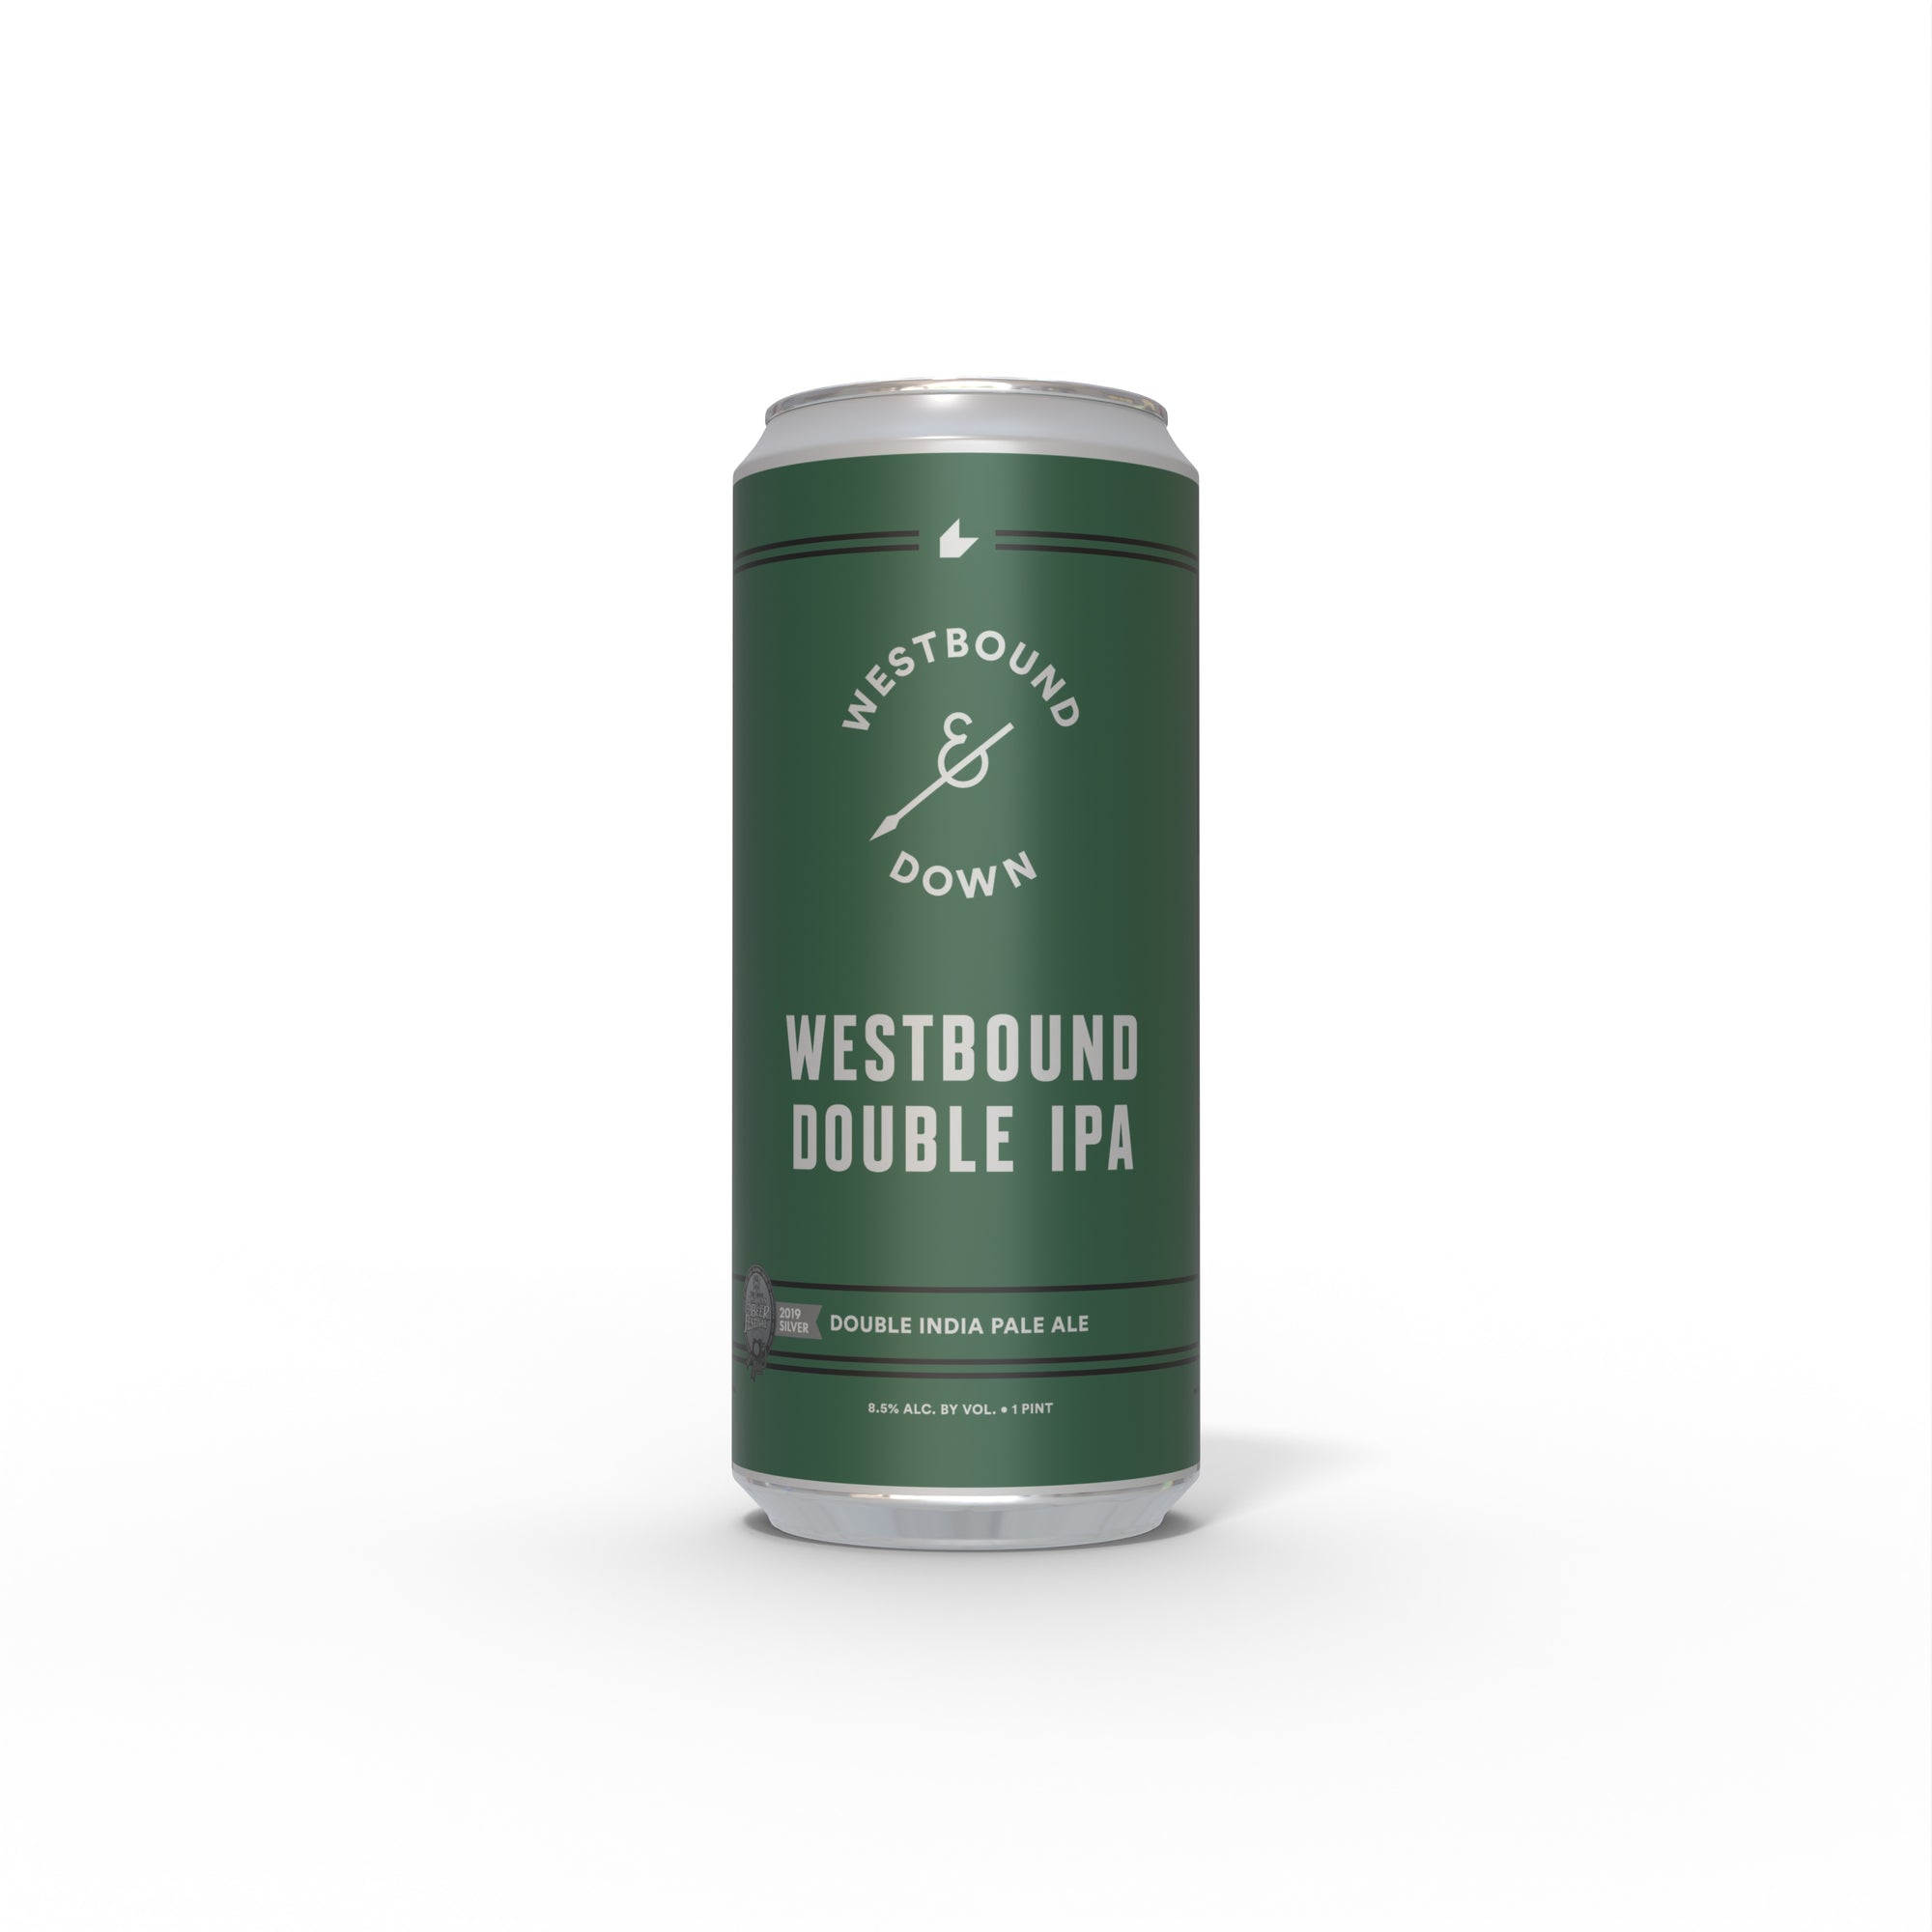 Westbound Double IPA